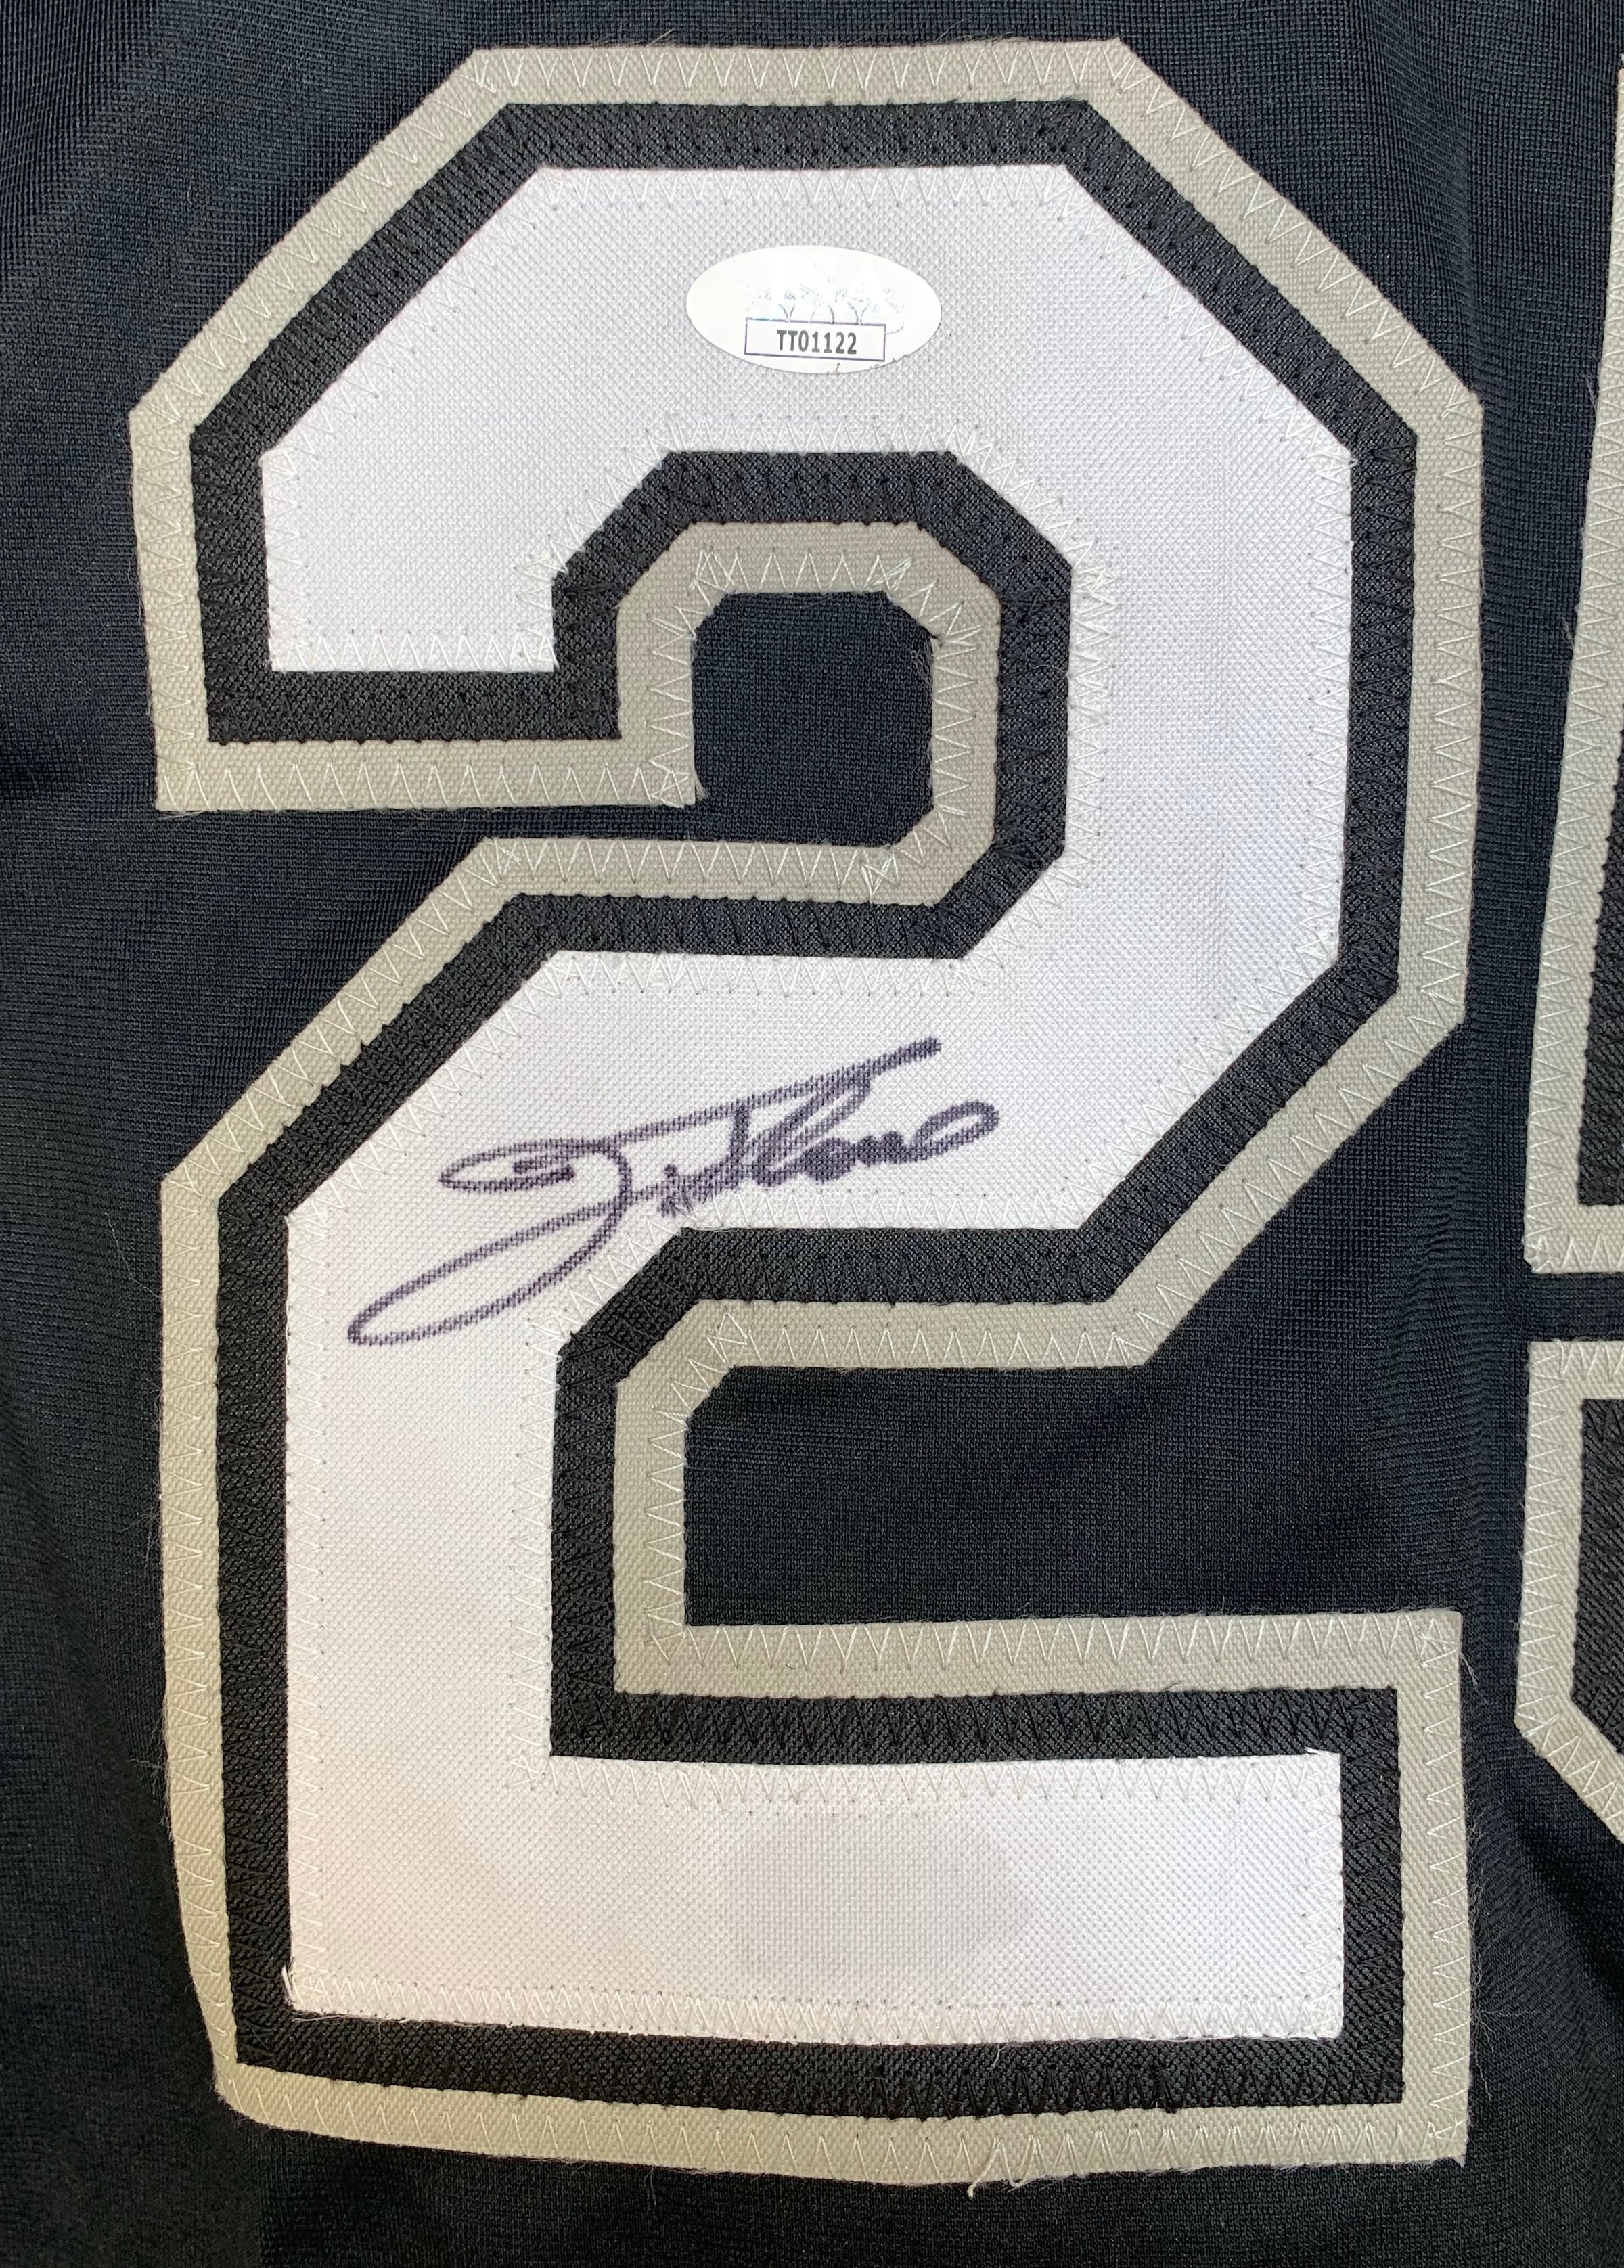 Jim Thome Autographed Jersey and Art Piece